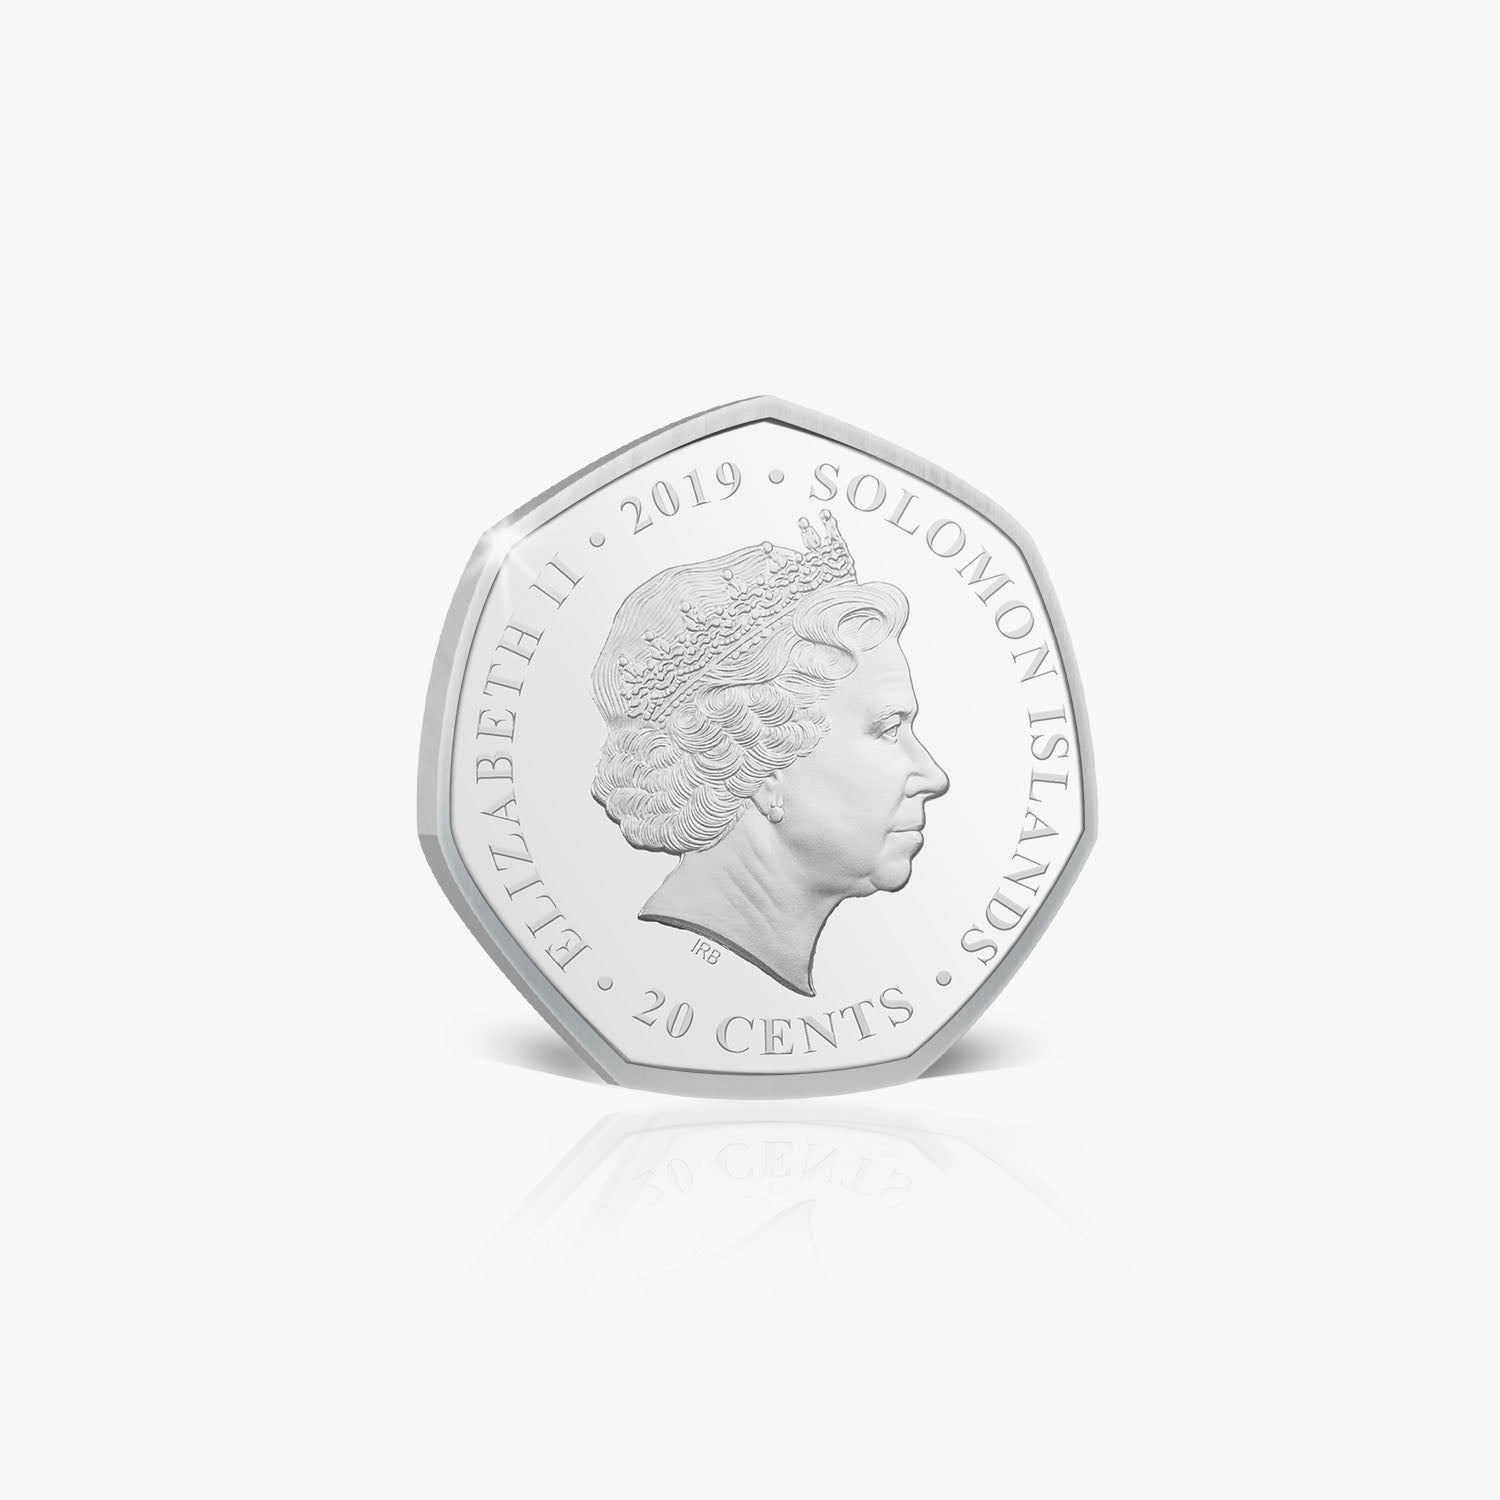 Supersonic Silver-Plated 20 Cents Coin